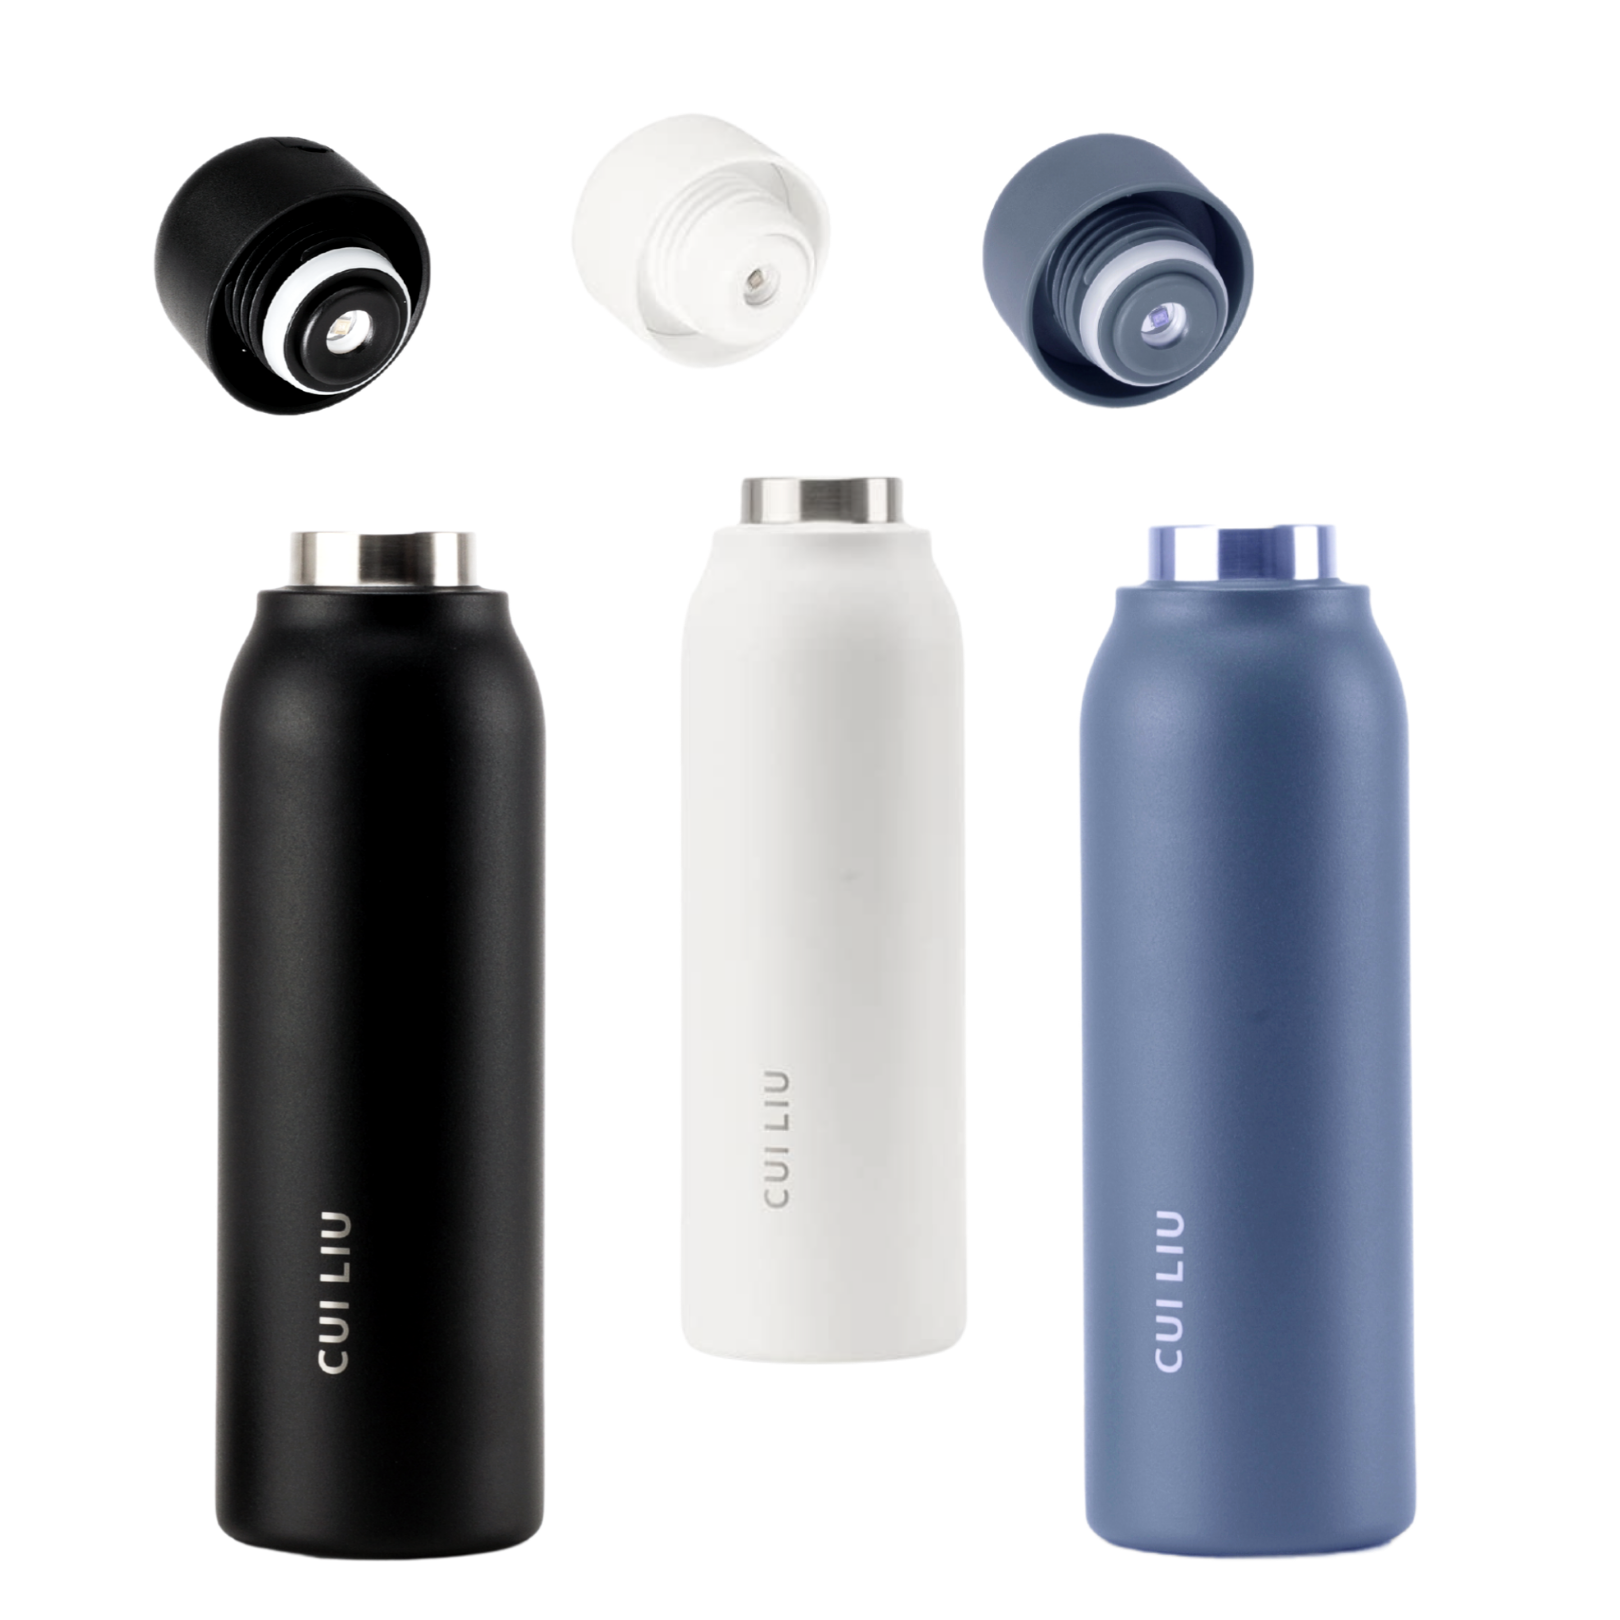 Self-Cleaning and Insulated Stainless Steel Water Bottle with UV